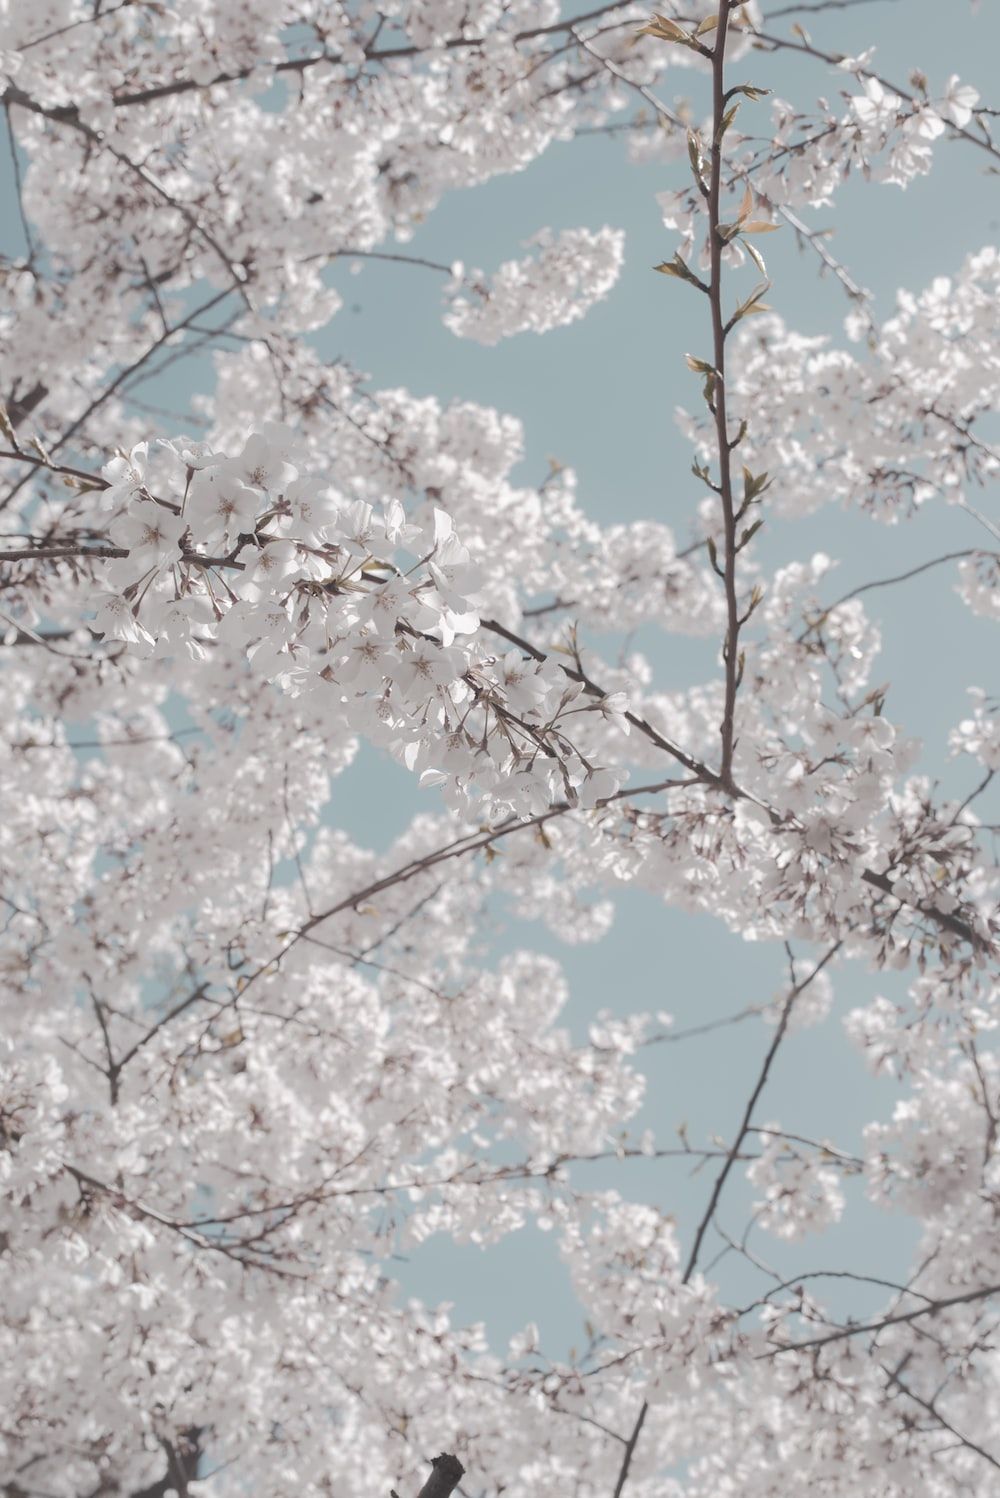 A close up of a tree with white flowers. - Bright